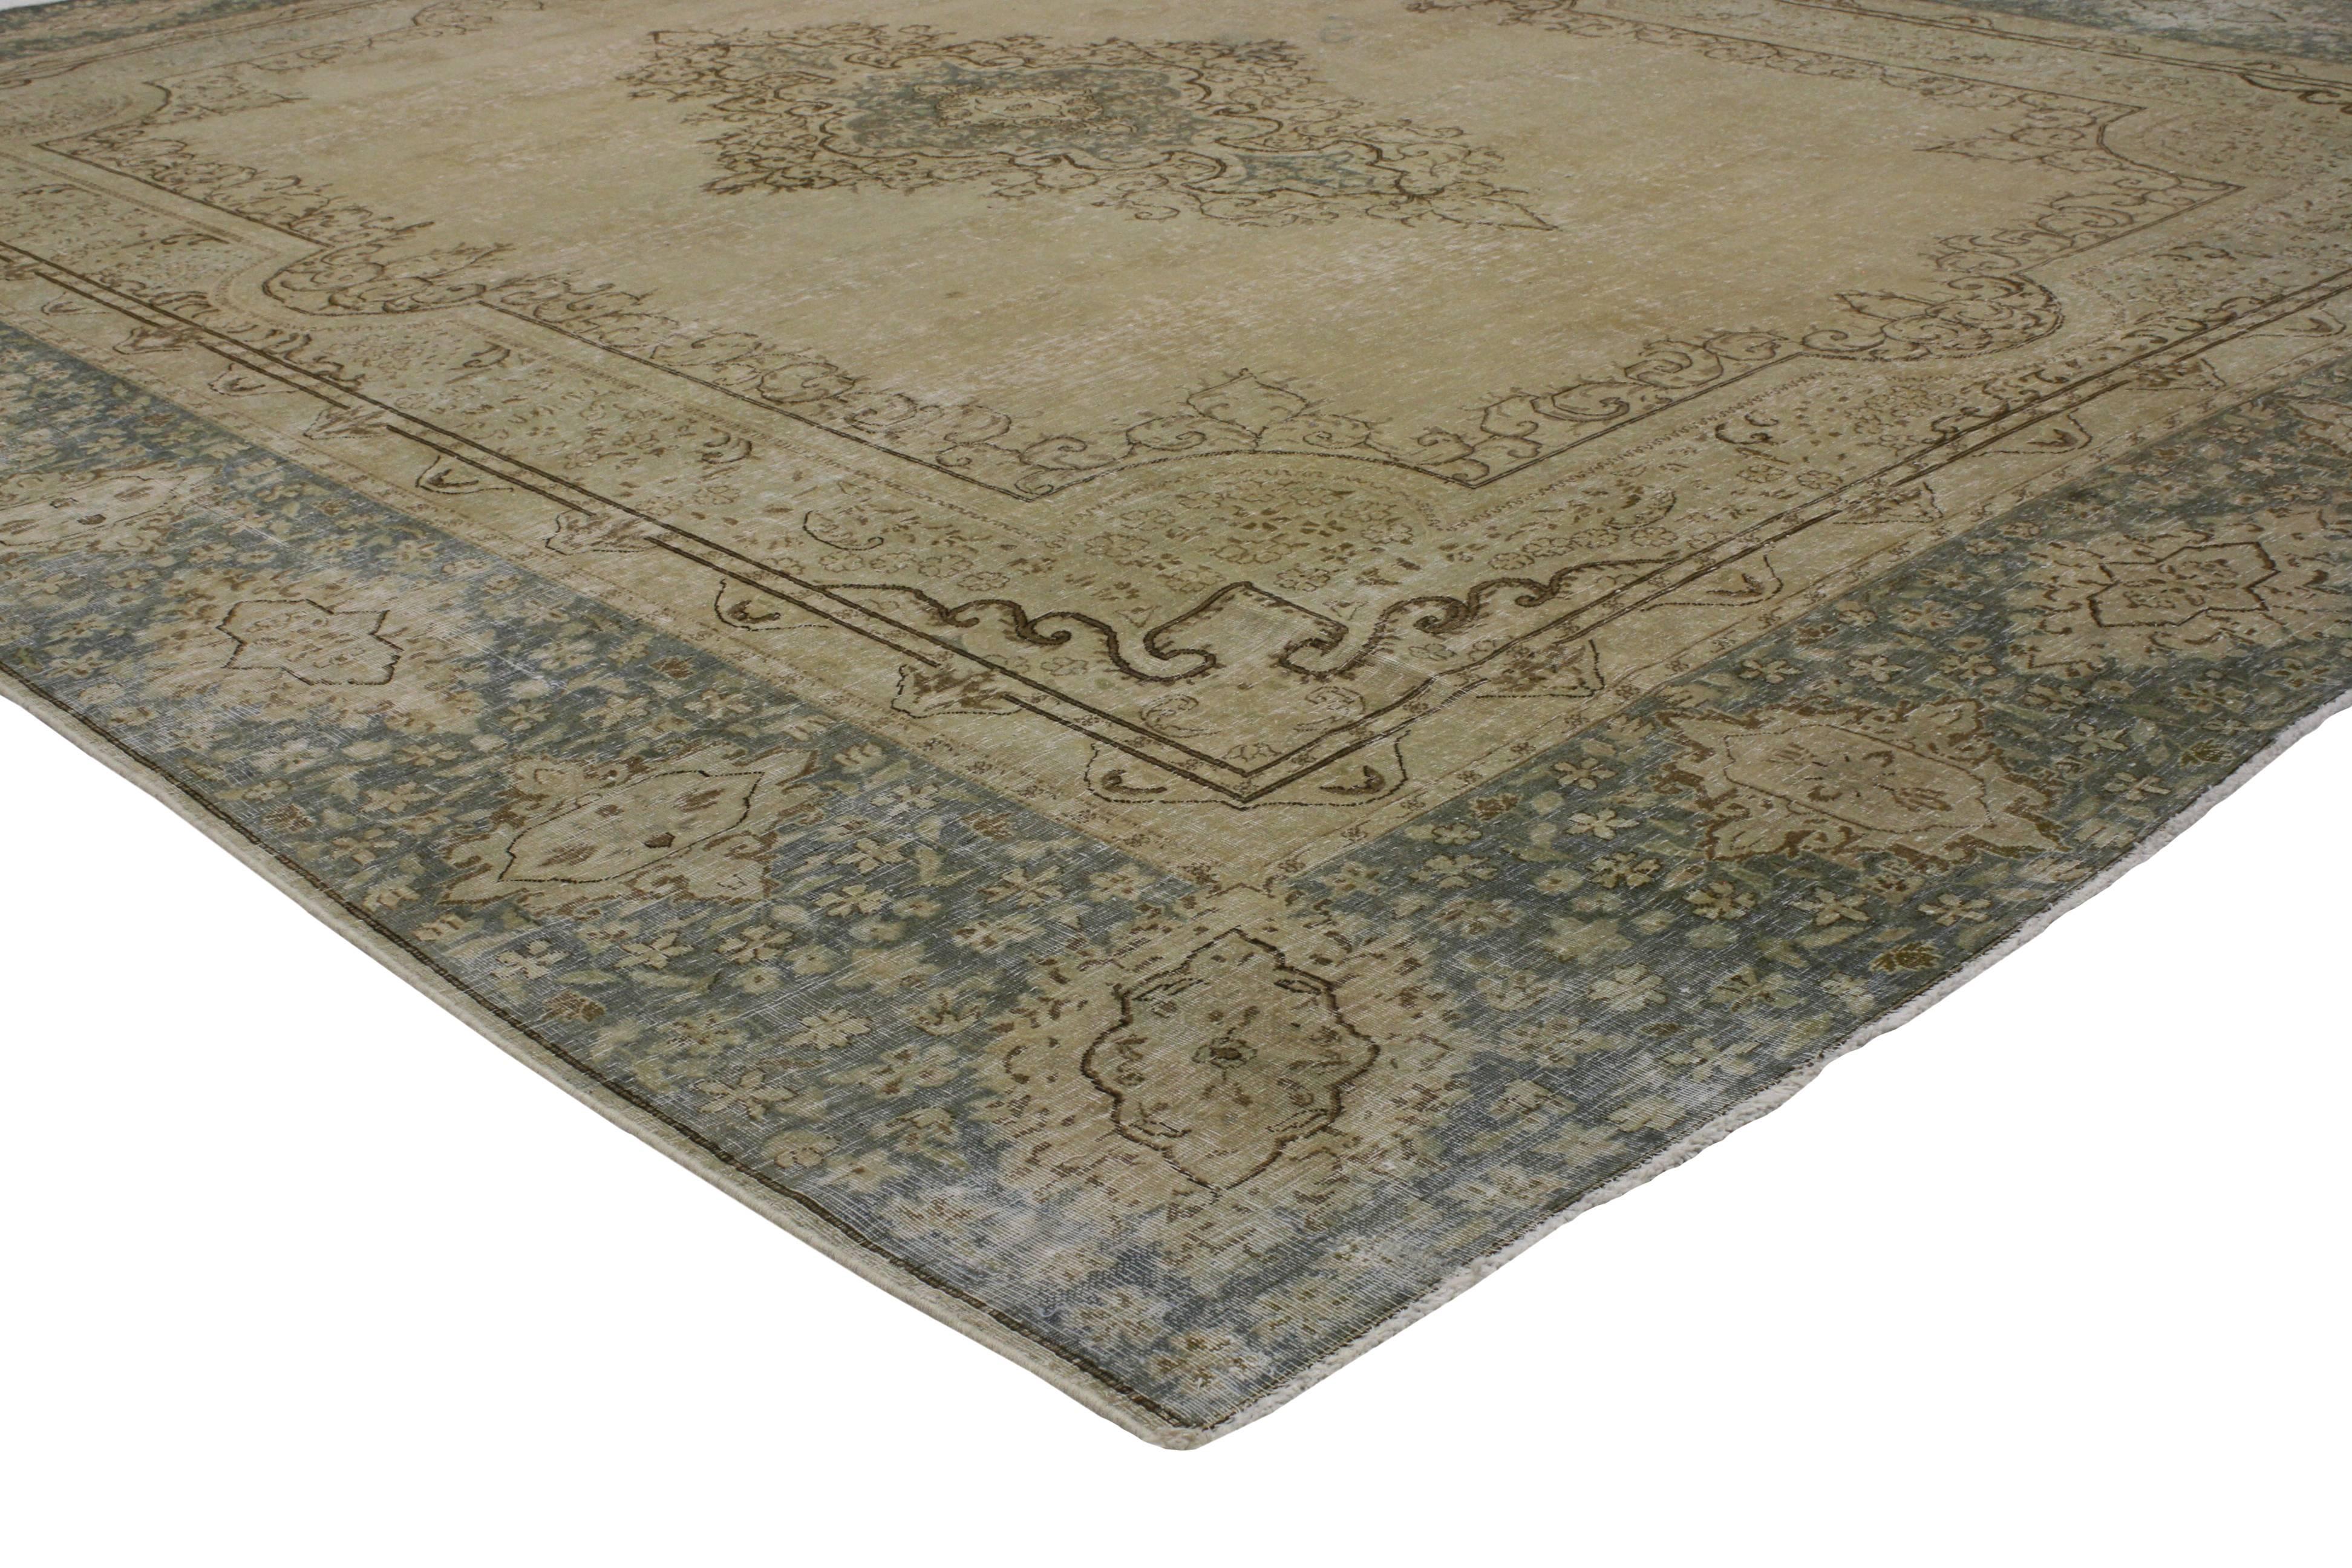 Subdued neutral colors and an elegant combination of texture and pattern create a calm base for this vintage Persian Kerman rug modern Industrial style. With its distressed composition, idyllic open field of beige combined with a cool slate gray